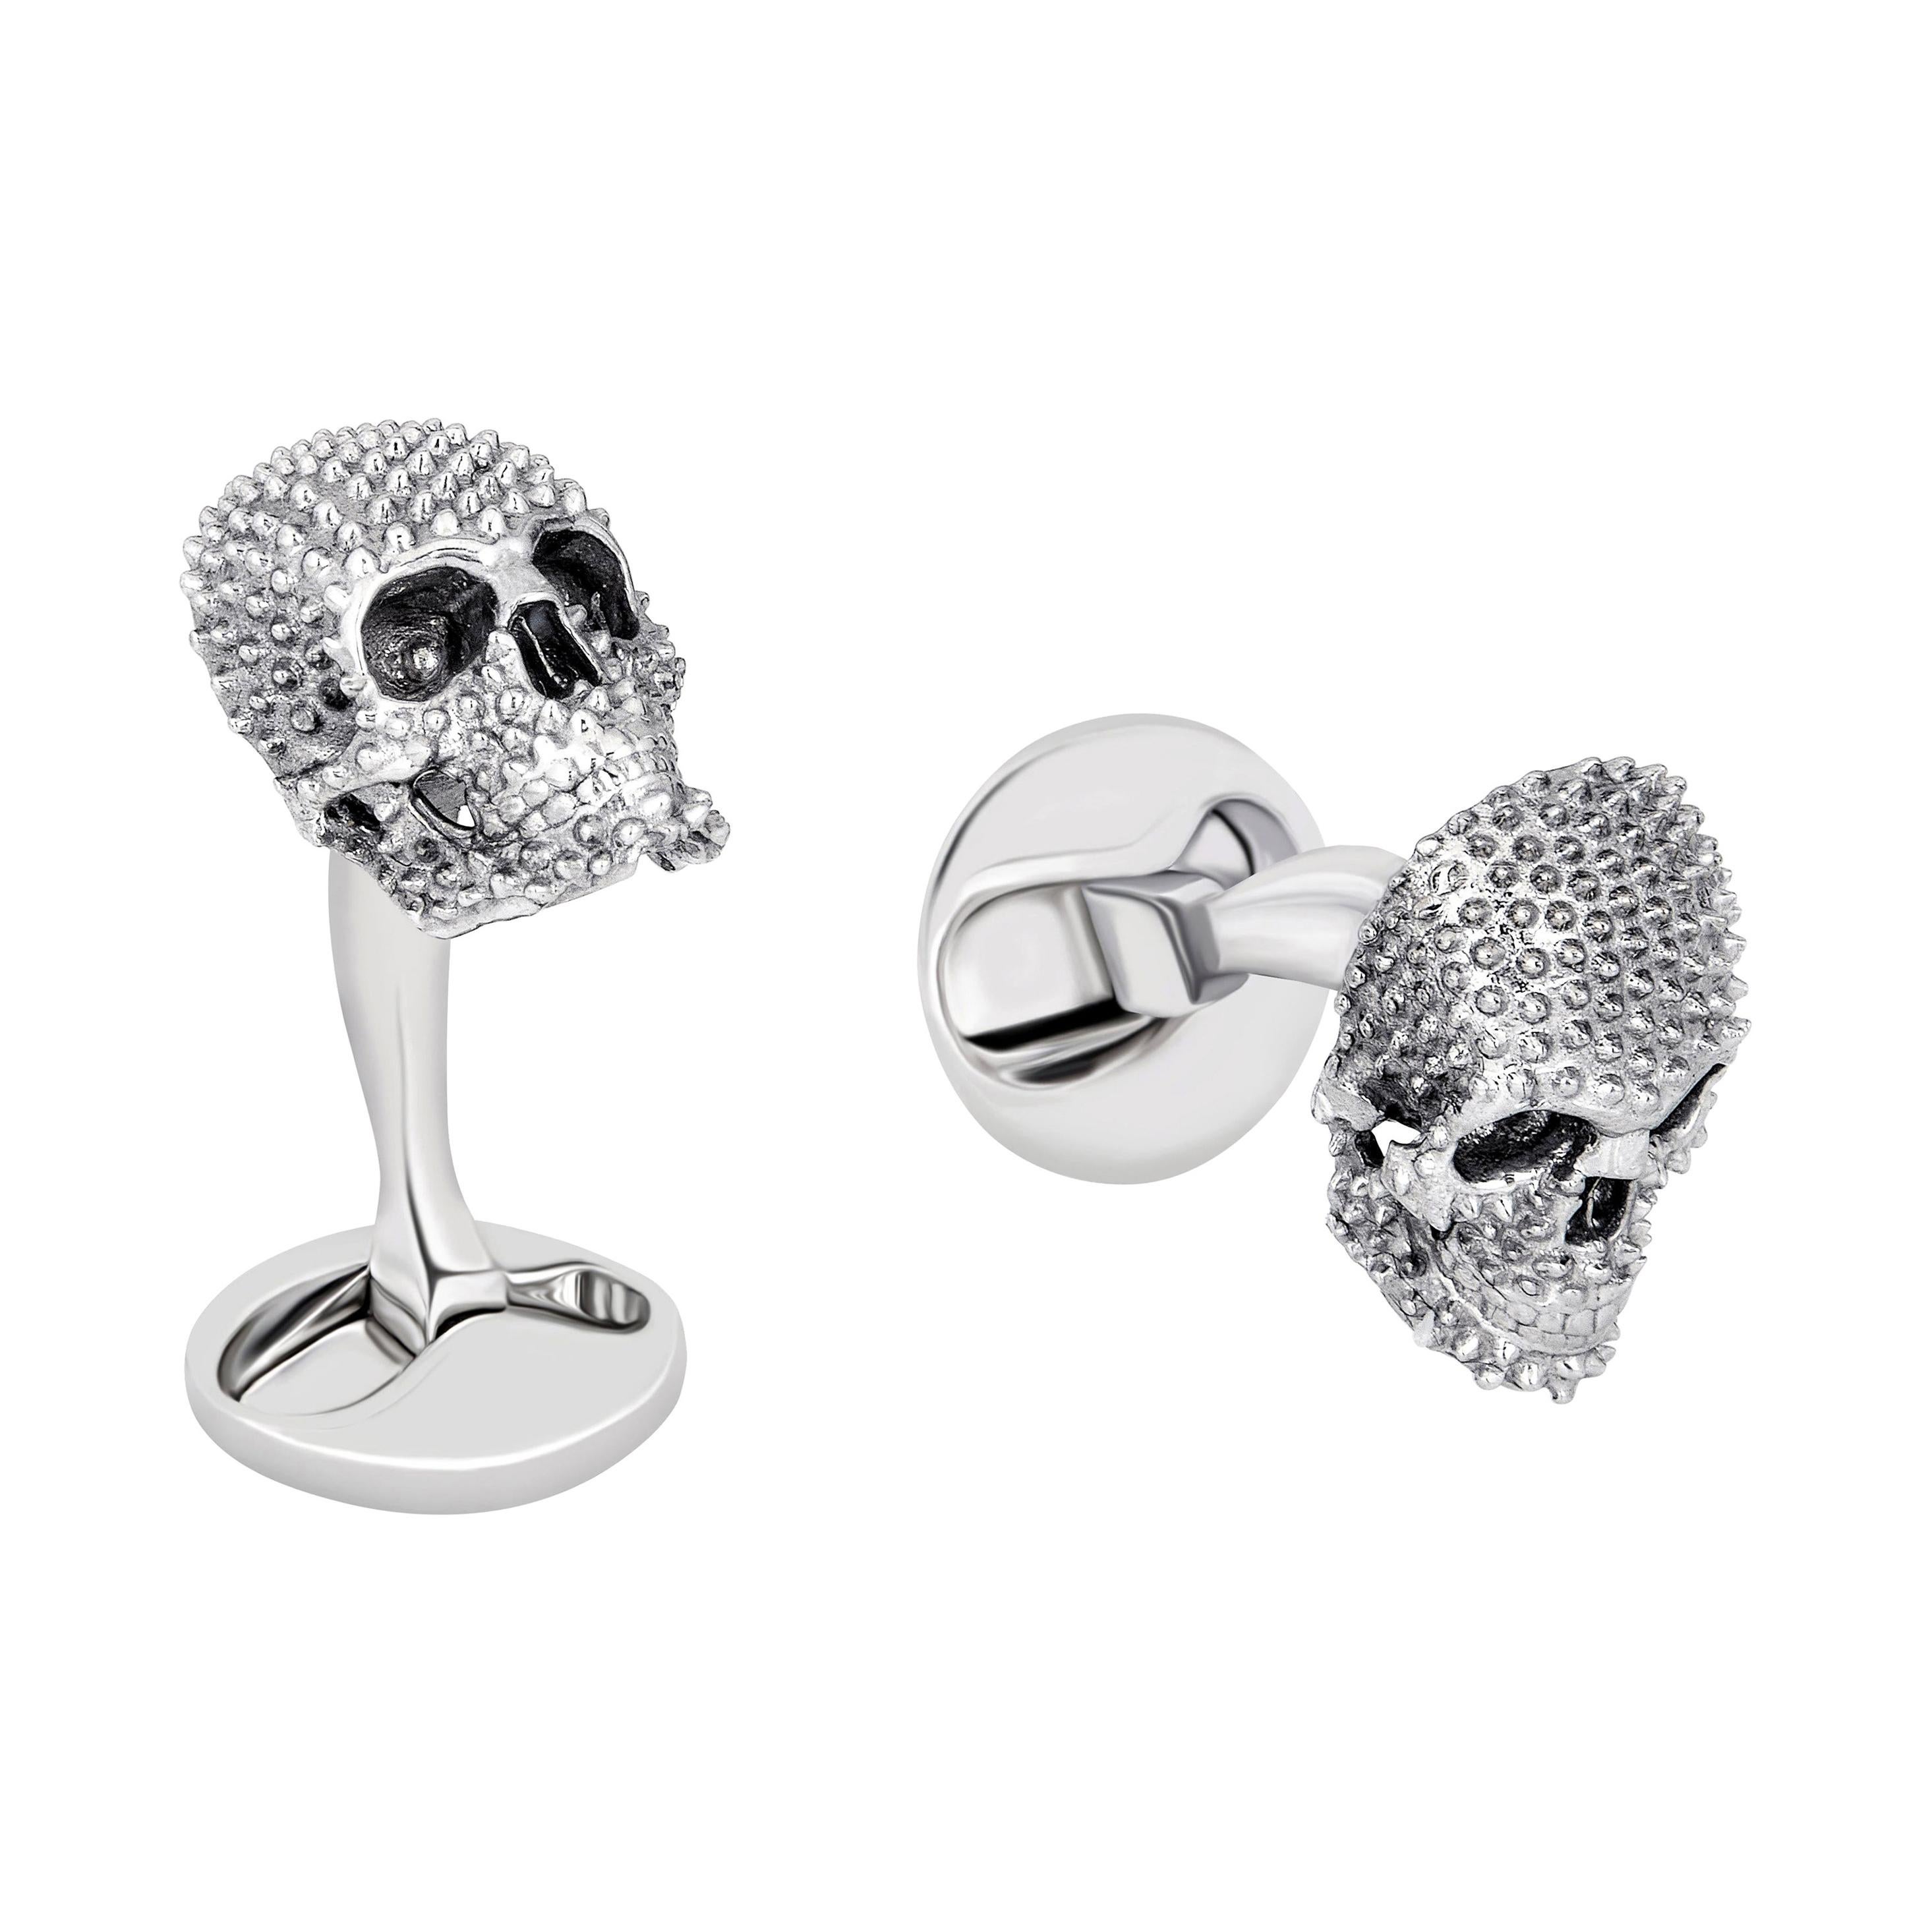 Studded Skull Cufflinks in Sterling Silver by Fils Unique For Sale